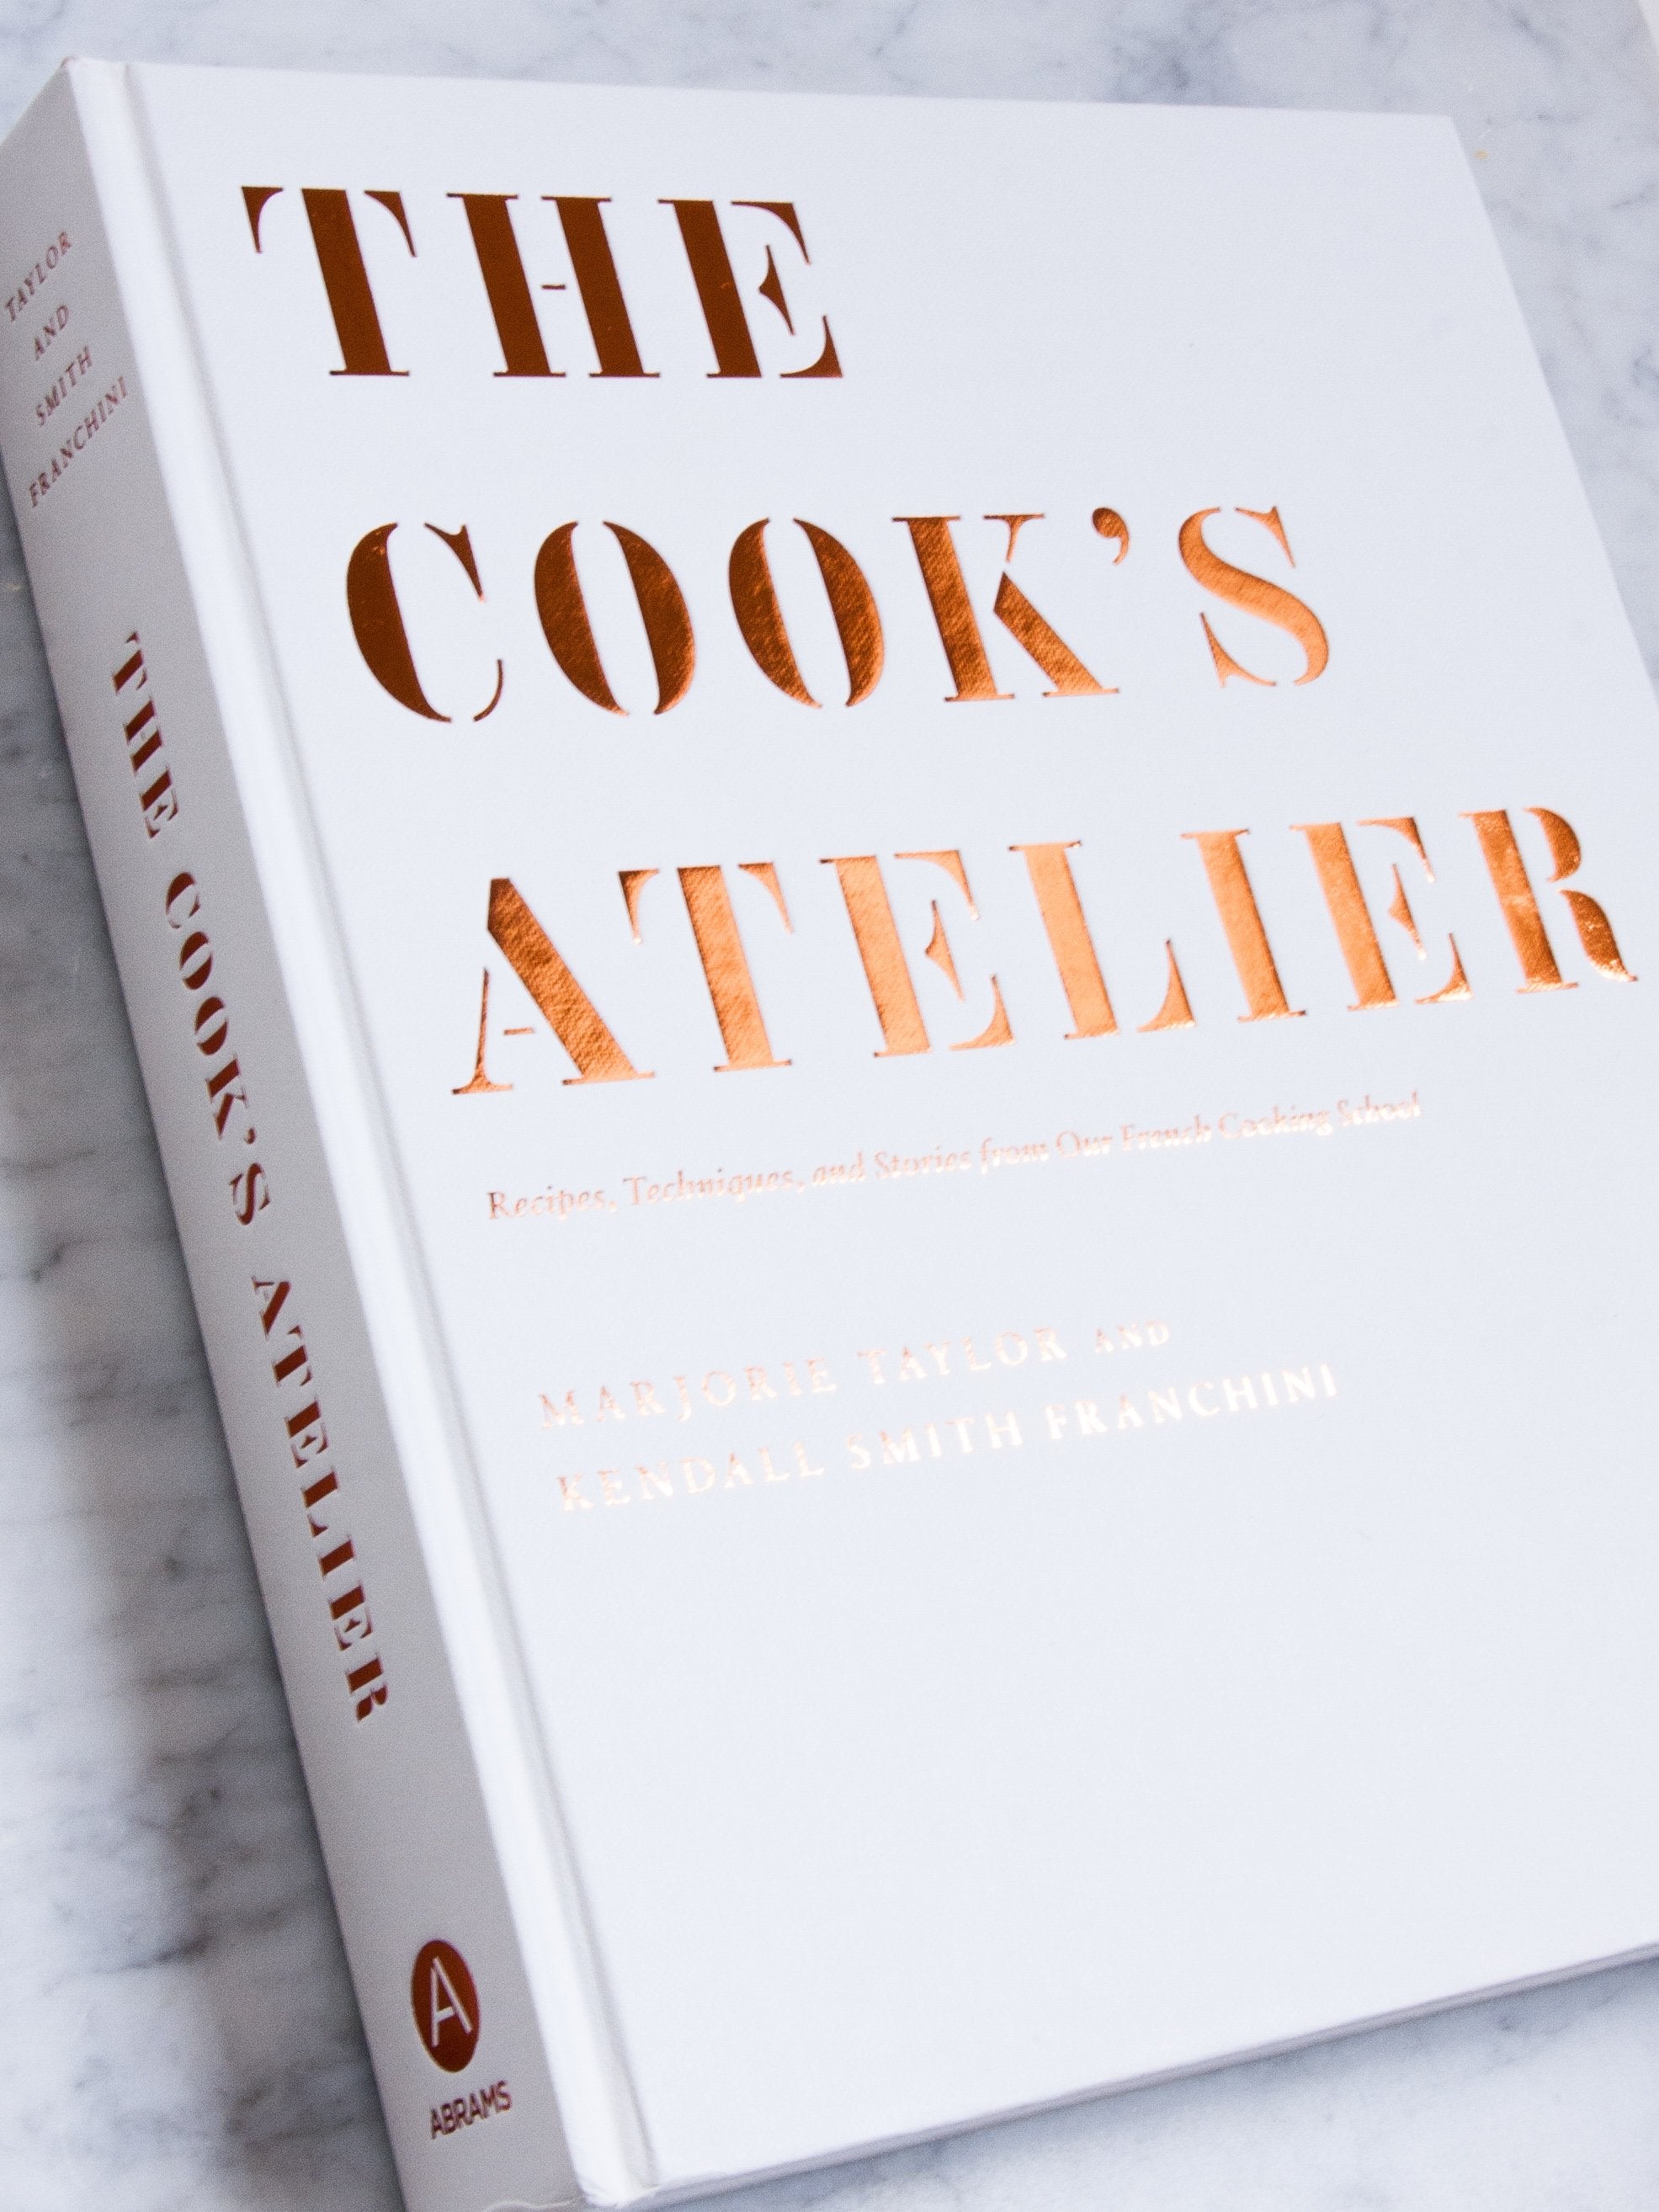 The Cook's Atelier Cookbook - Signed by Marjorie + Kendall